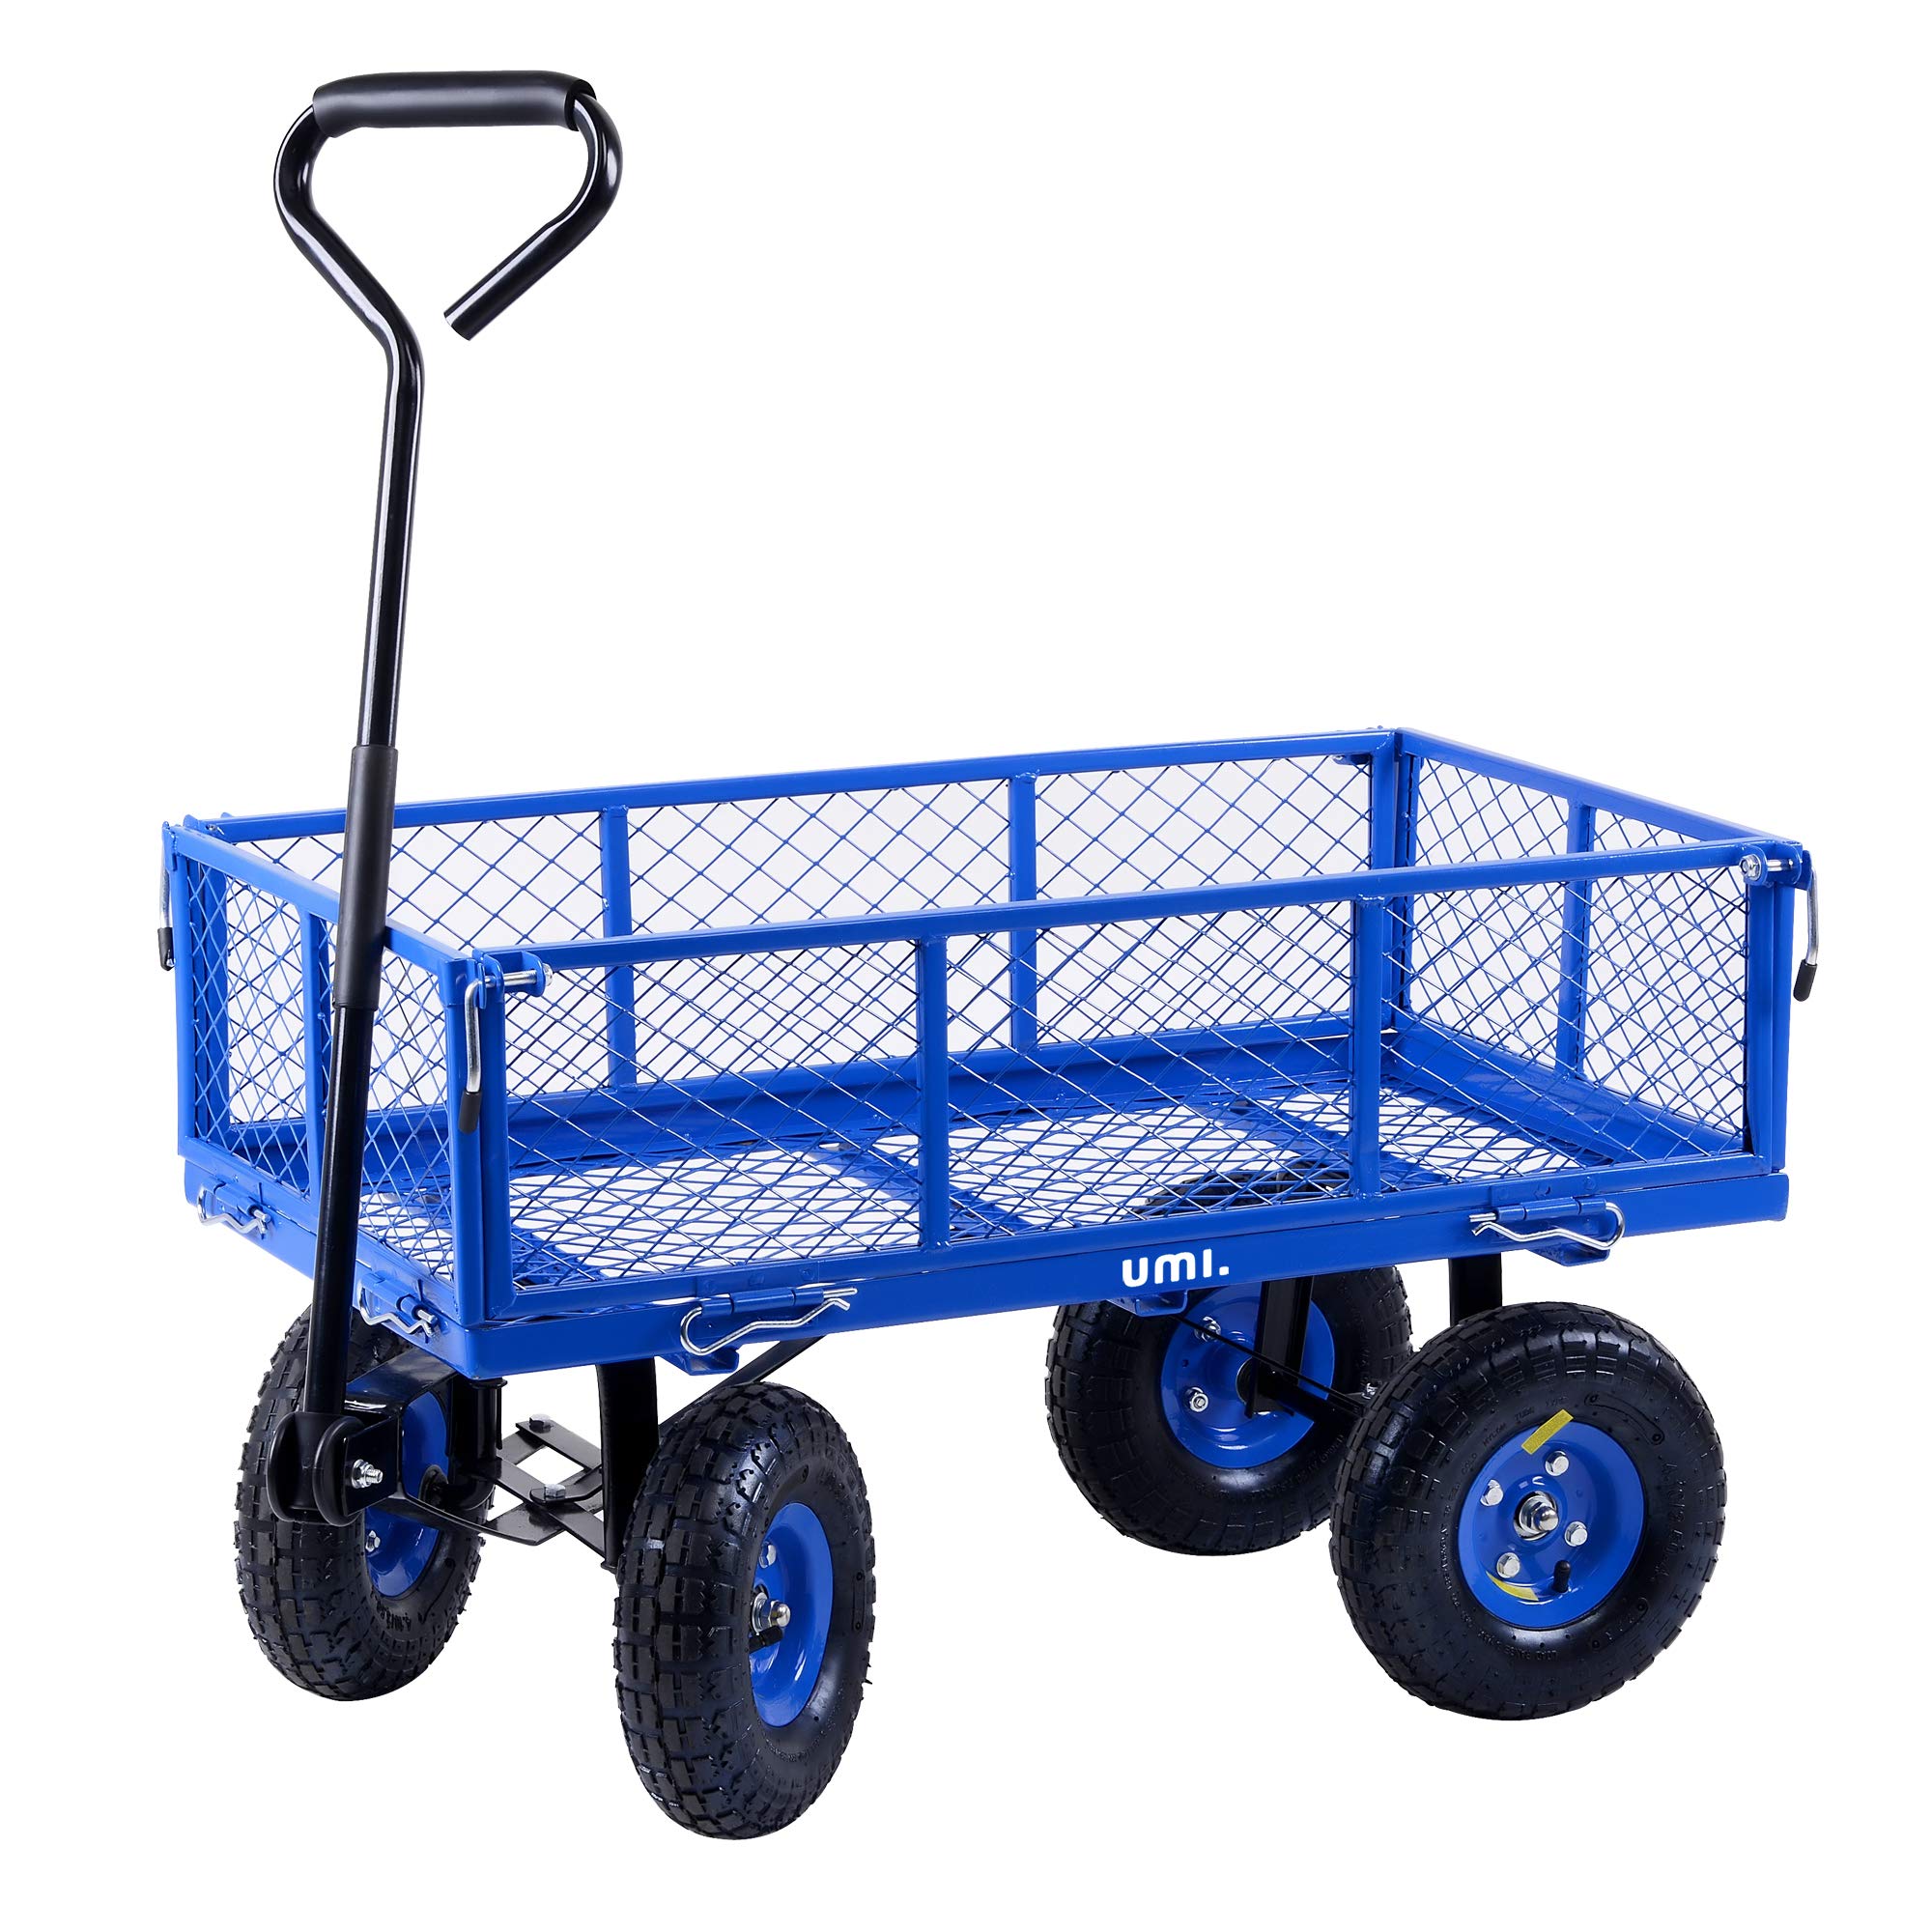 UMI Wagon Utility Cart Hand Truck Manual Heavy Duty Lawn Garden with Removable Side Meshes 400 lbs Max Capacity